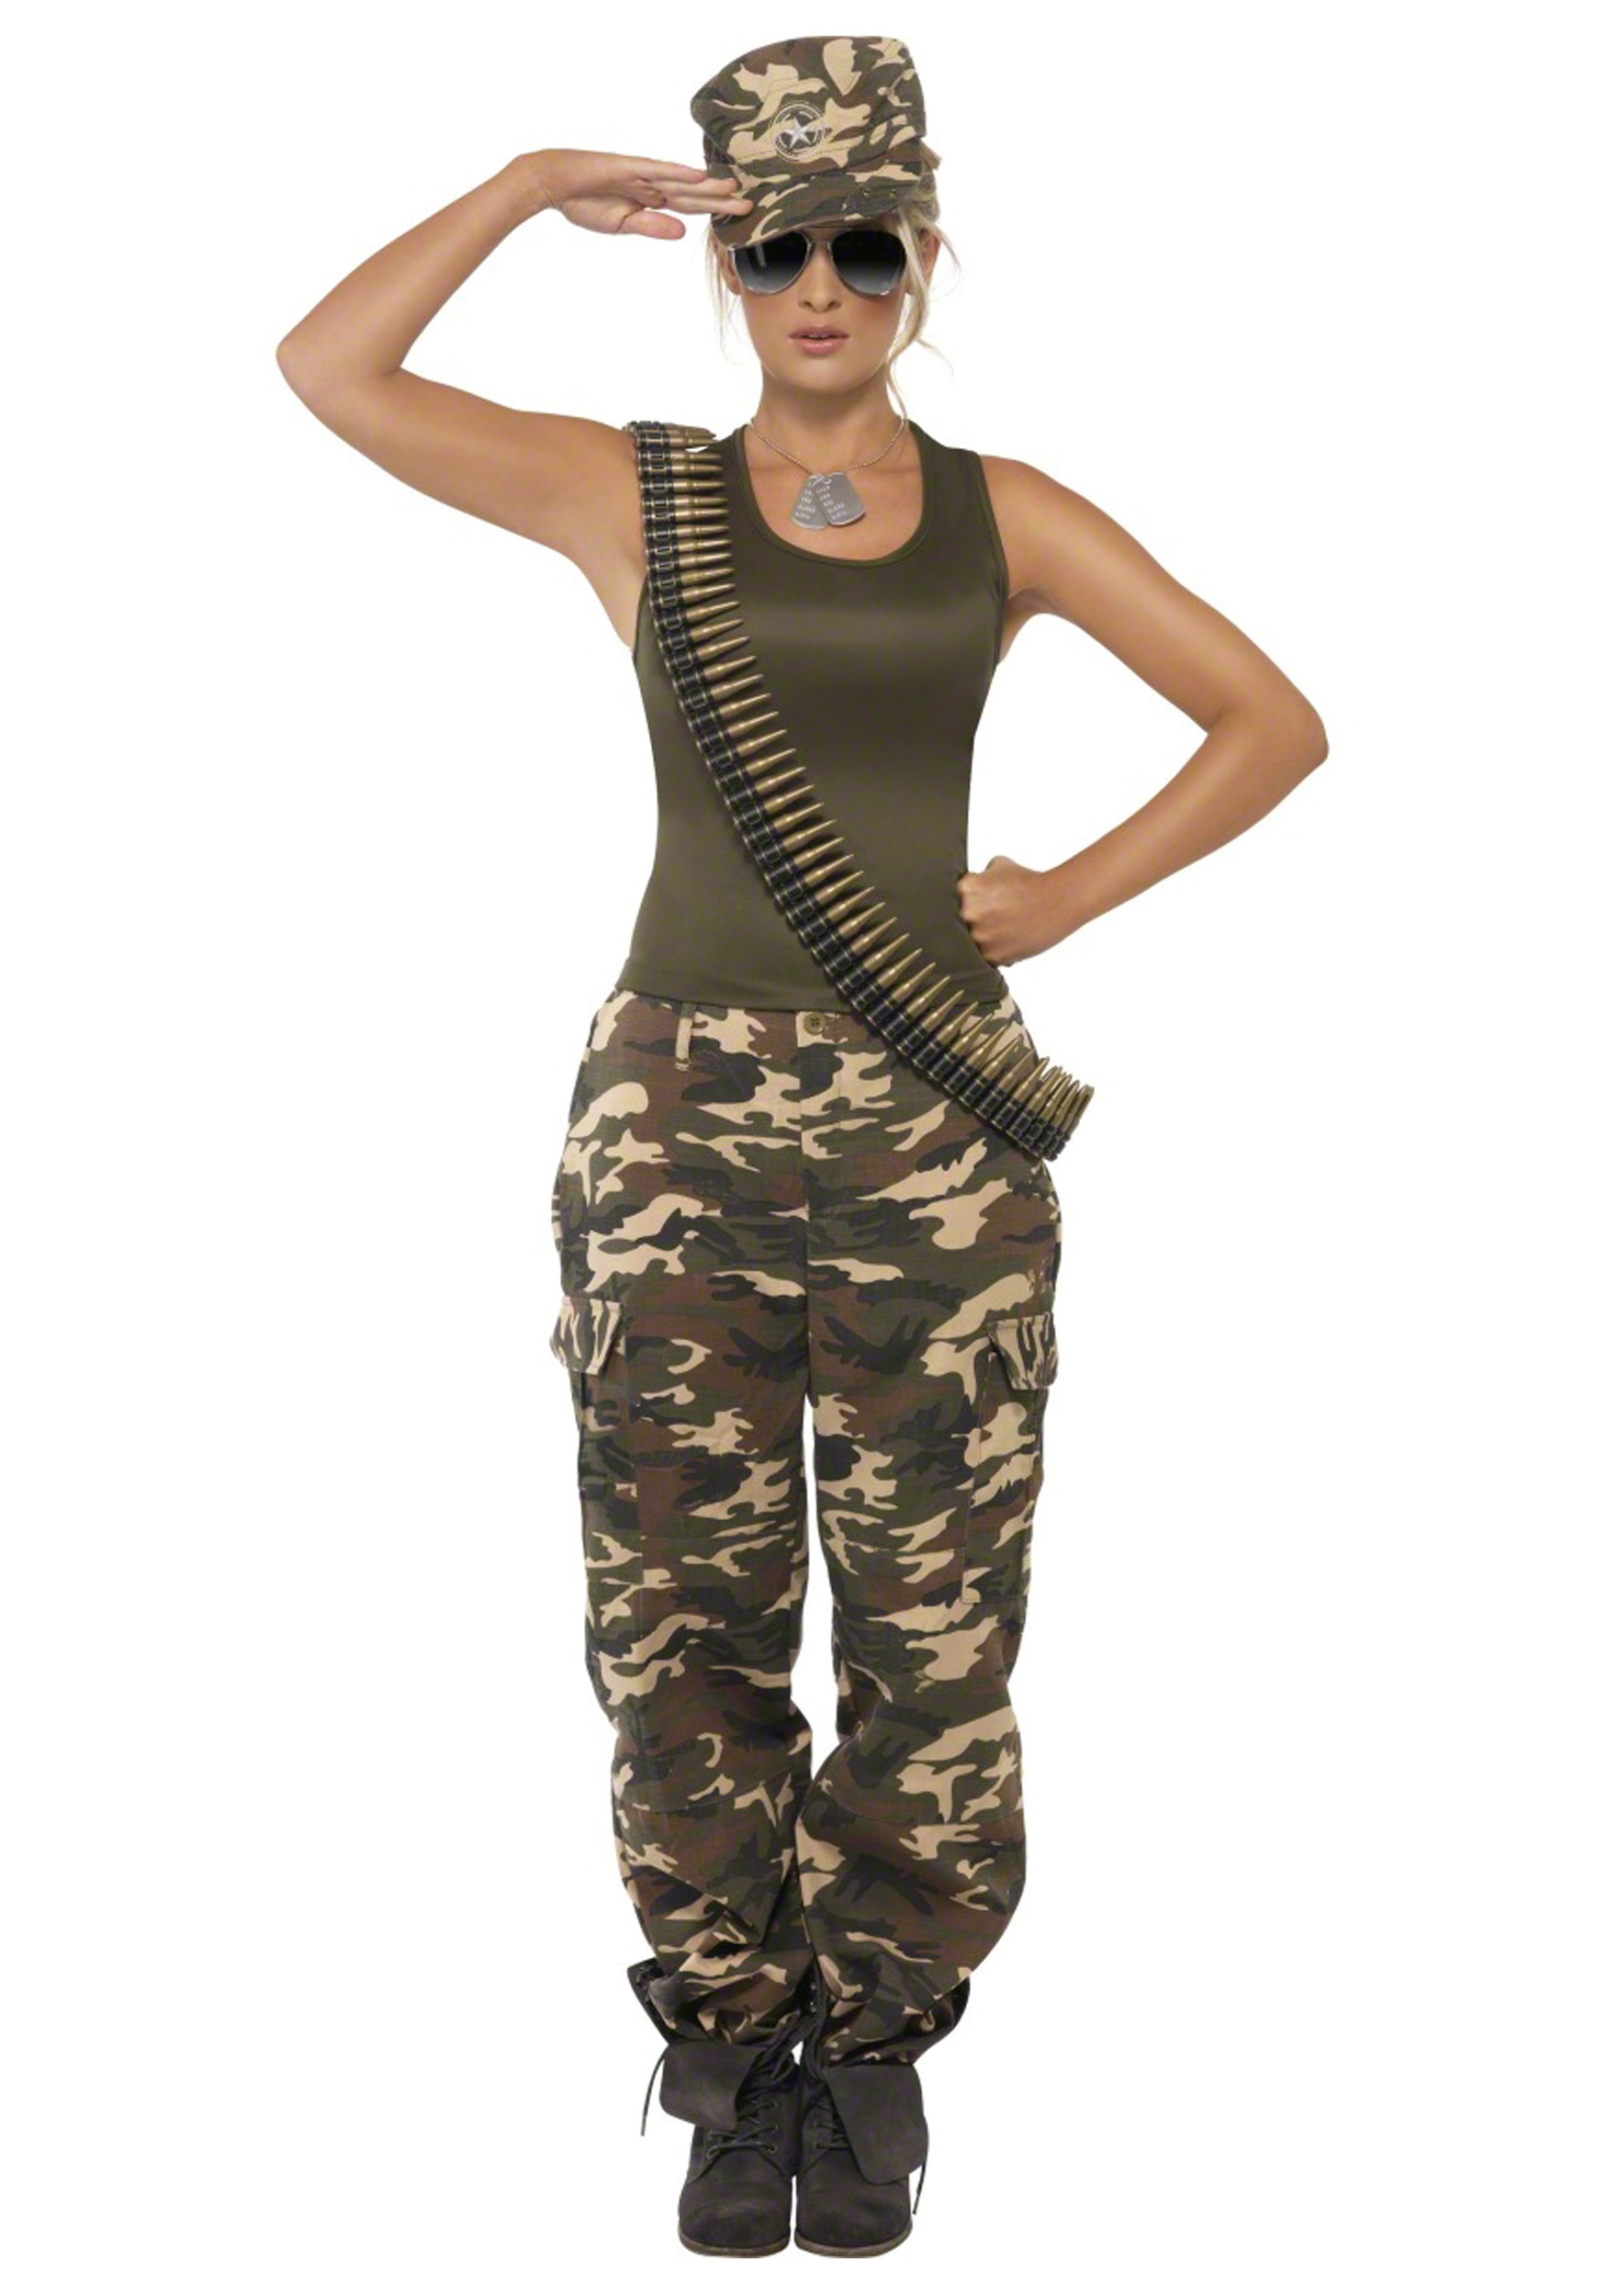 https://images.fun.com/products/10226/1-1/camo-soldier-womens-costume.jpg